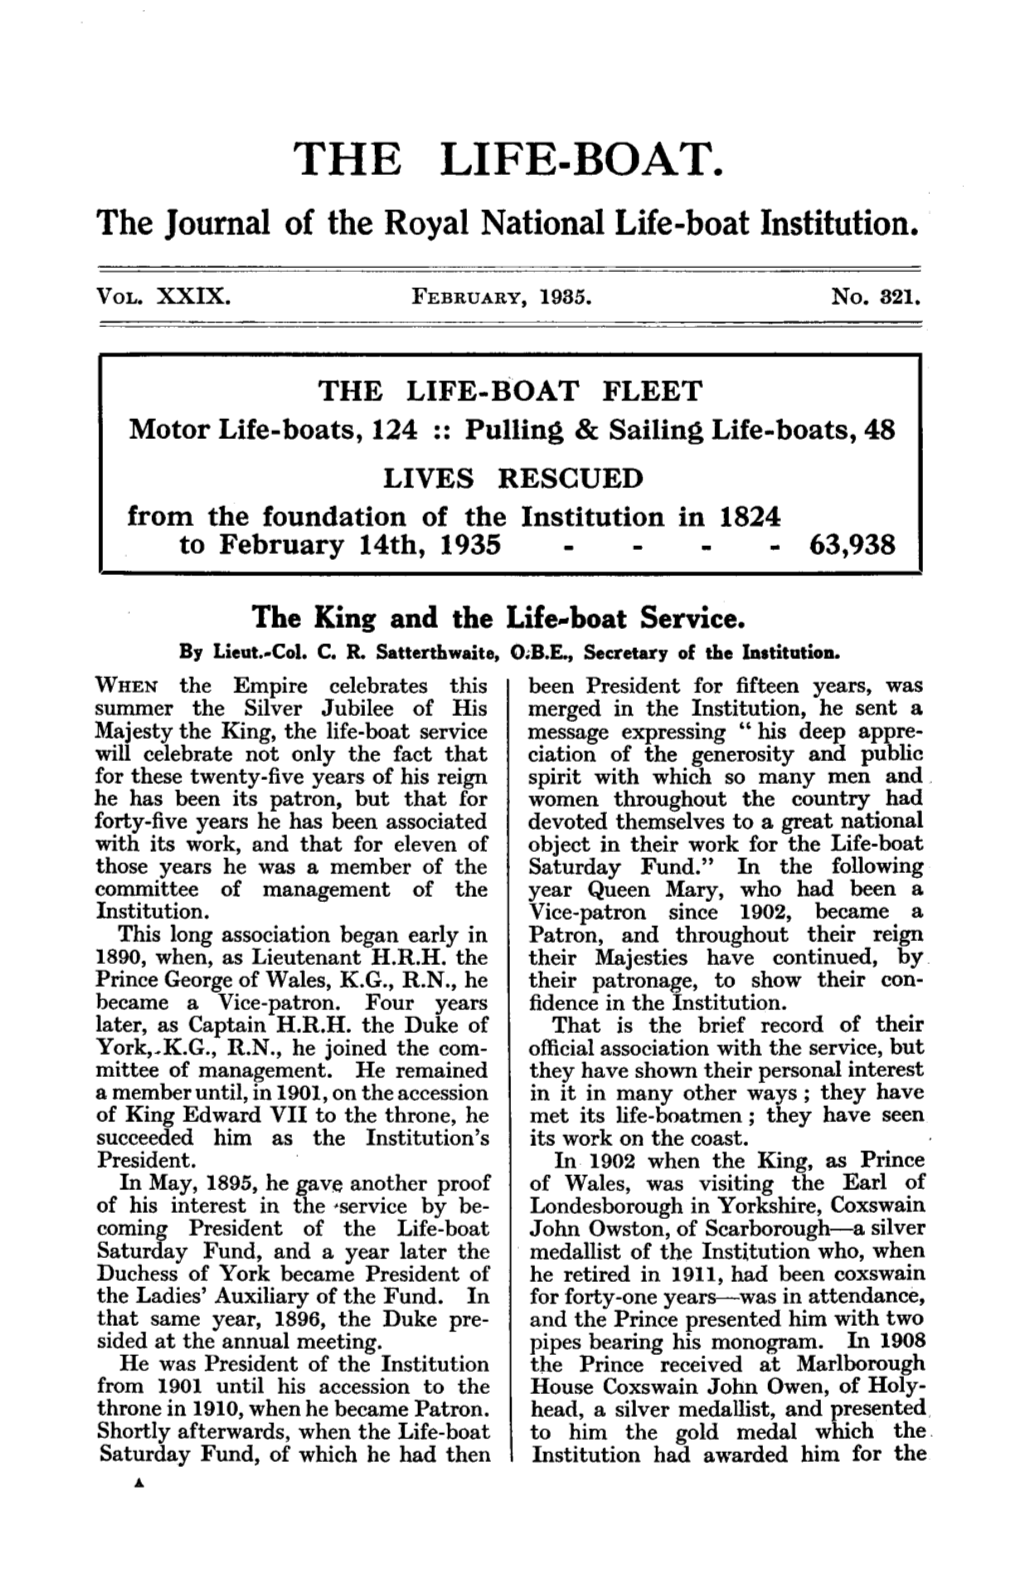 THE LIFE-BOAT. the Journal of the Royal National Life-Boat Institution